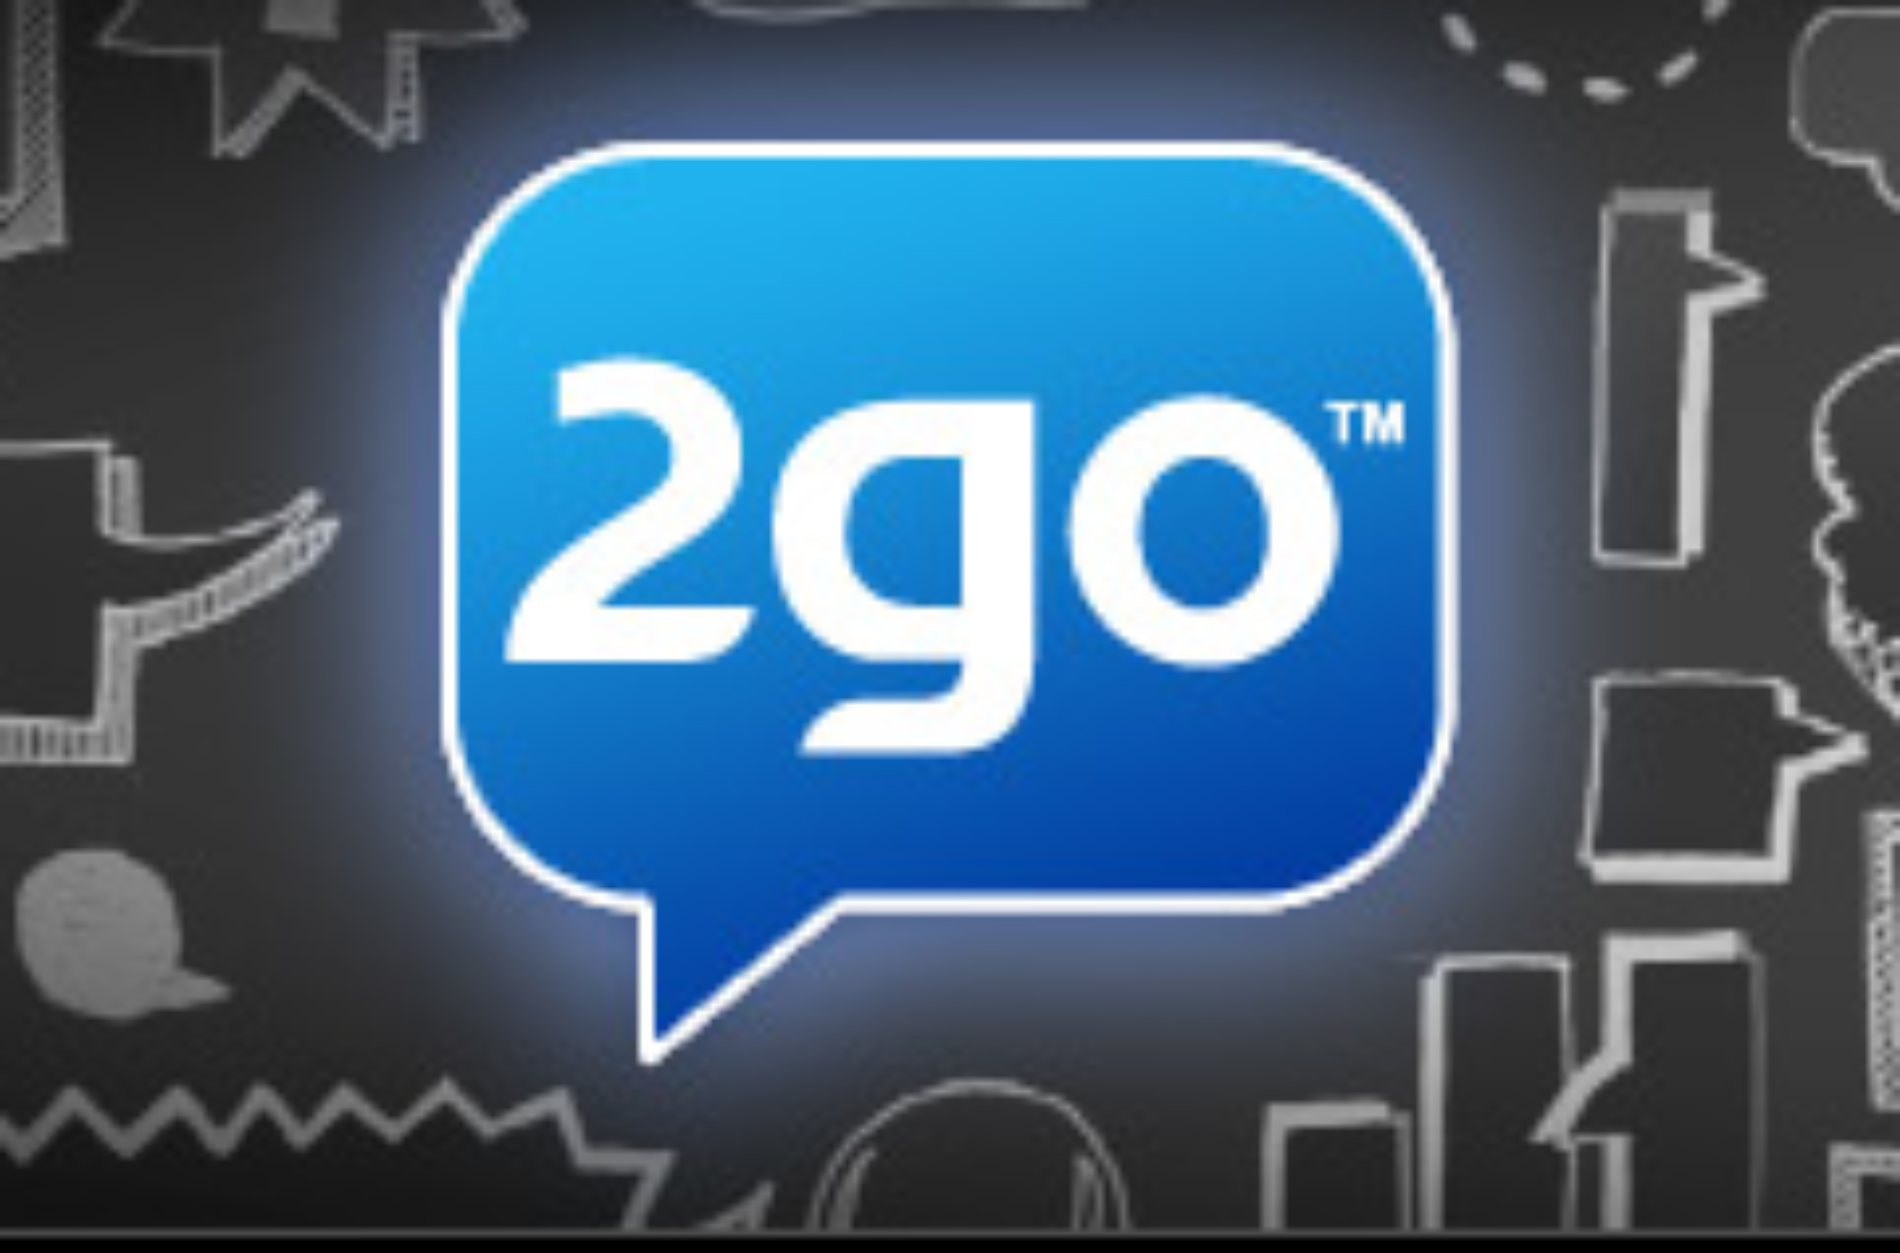 2go application download for pc windows 10